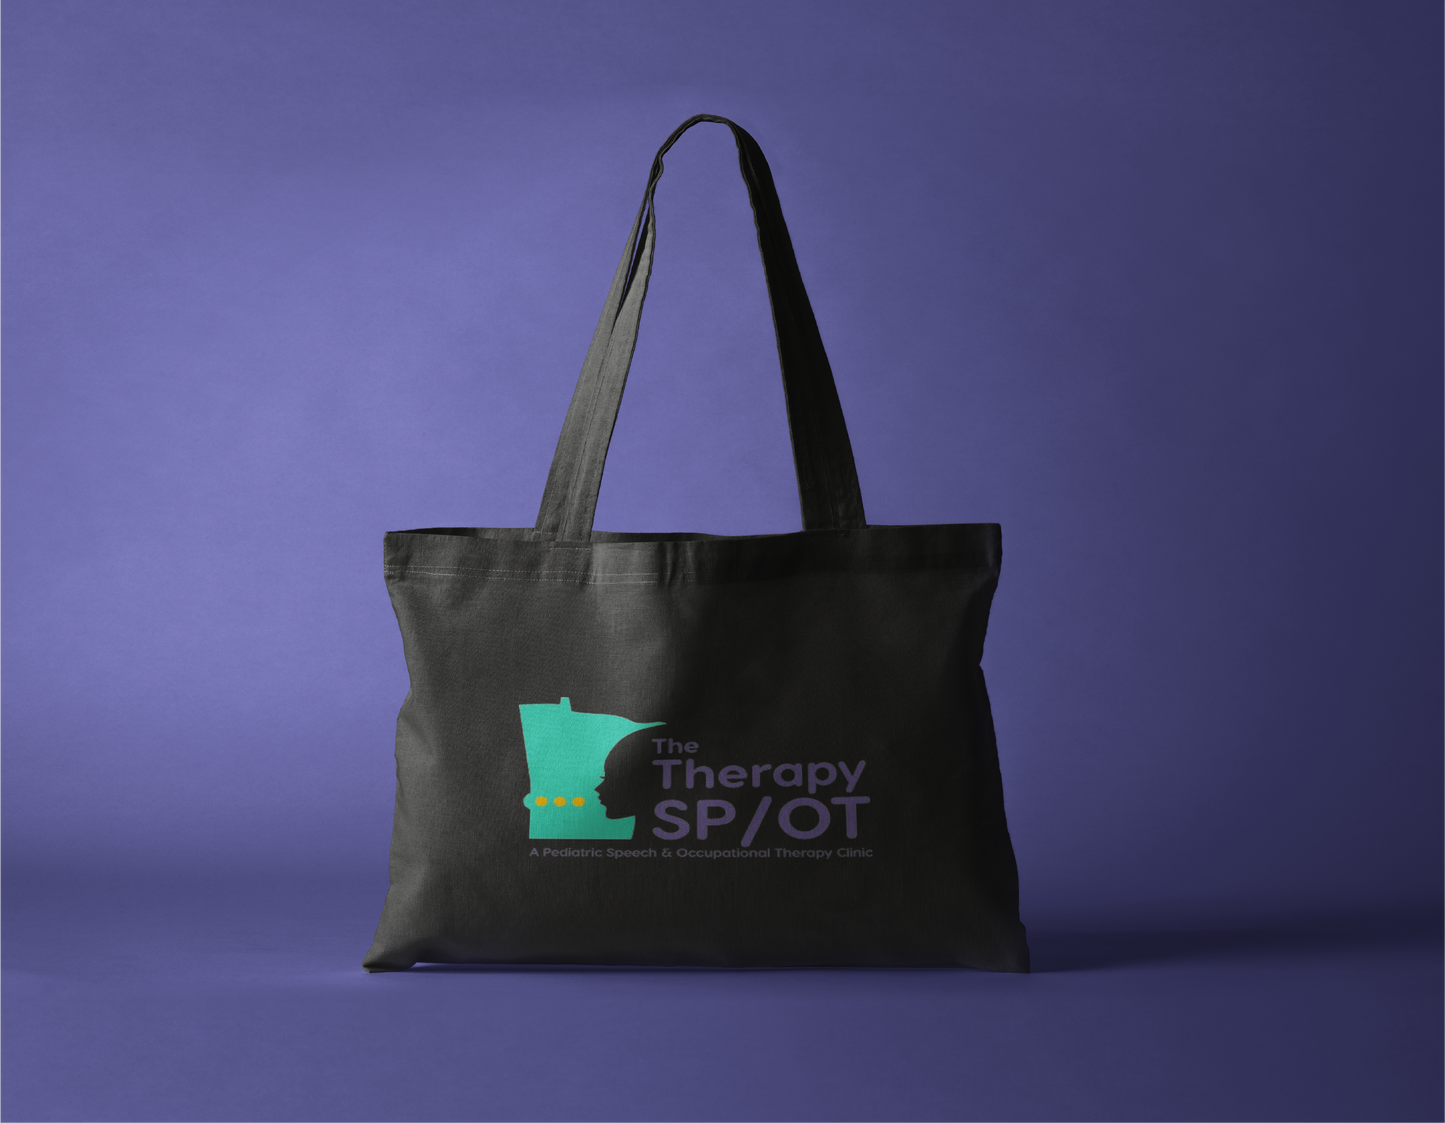 The Therapy SP/OT Zippered Tote